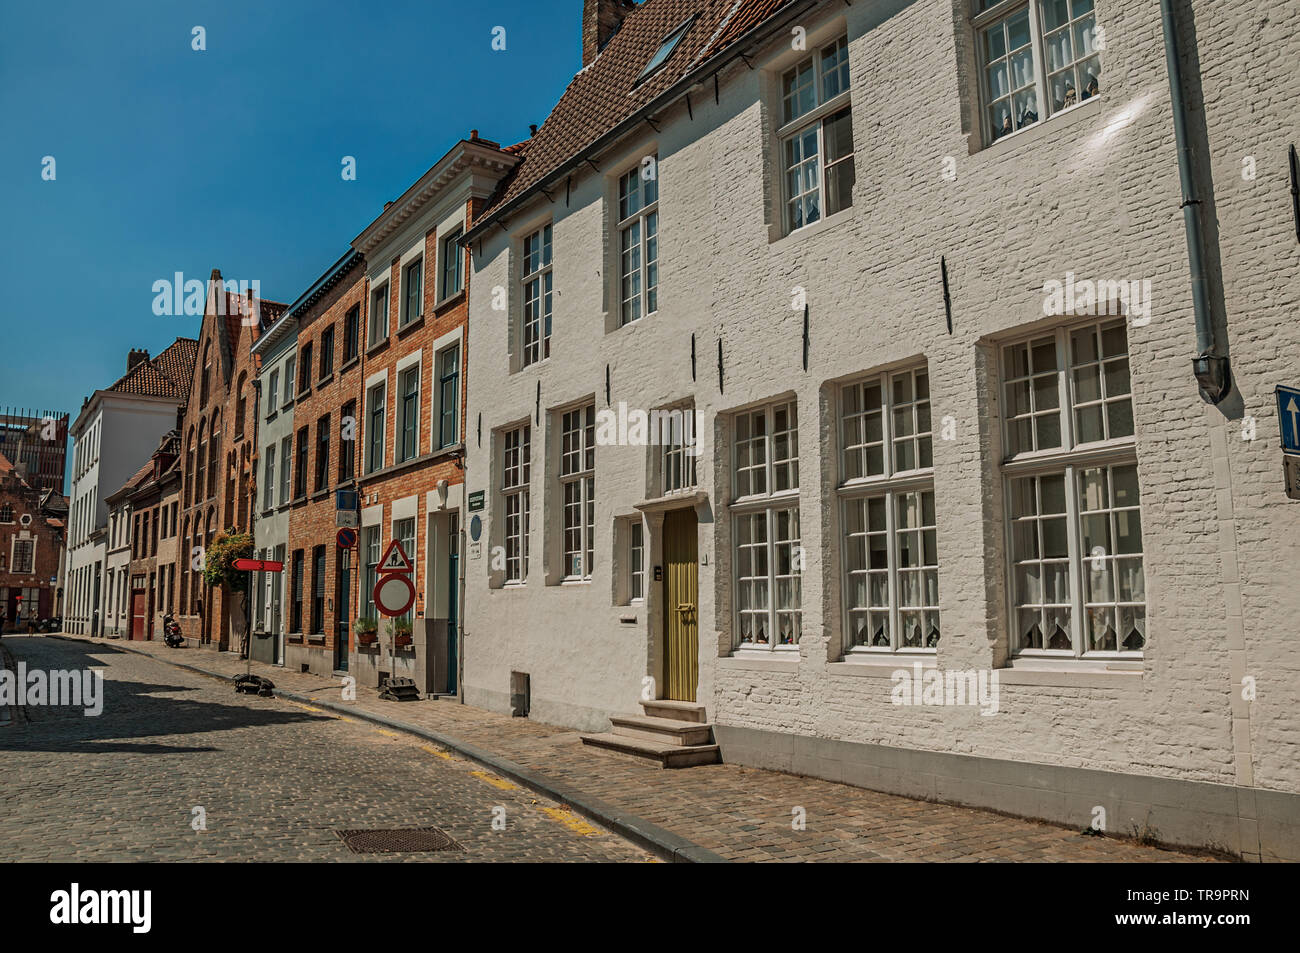 Brick facade of houses in typical style of the Flanders region in street of Bruges. Charming town with canals and old buildings in Belgium. Stock Photo